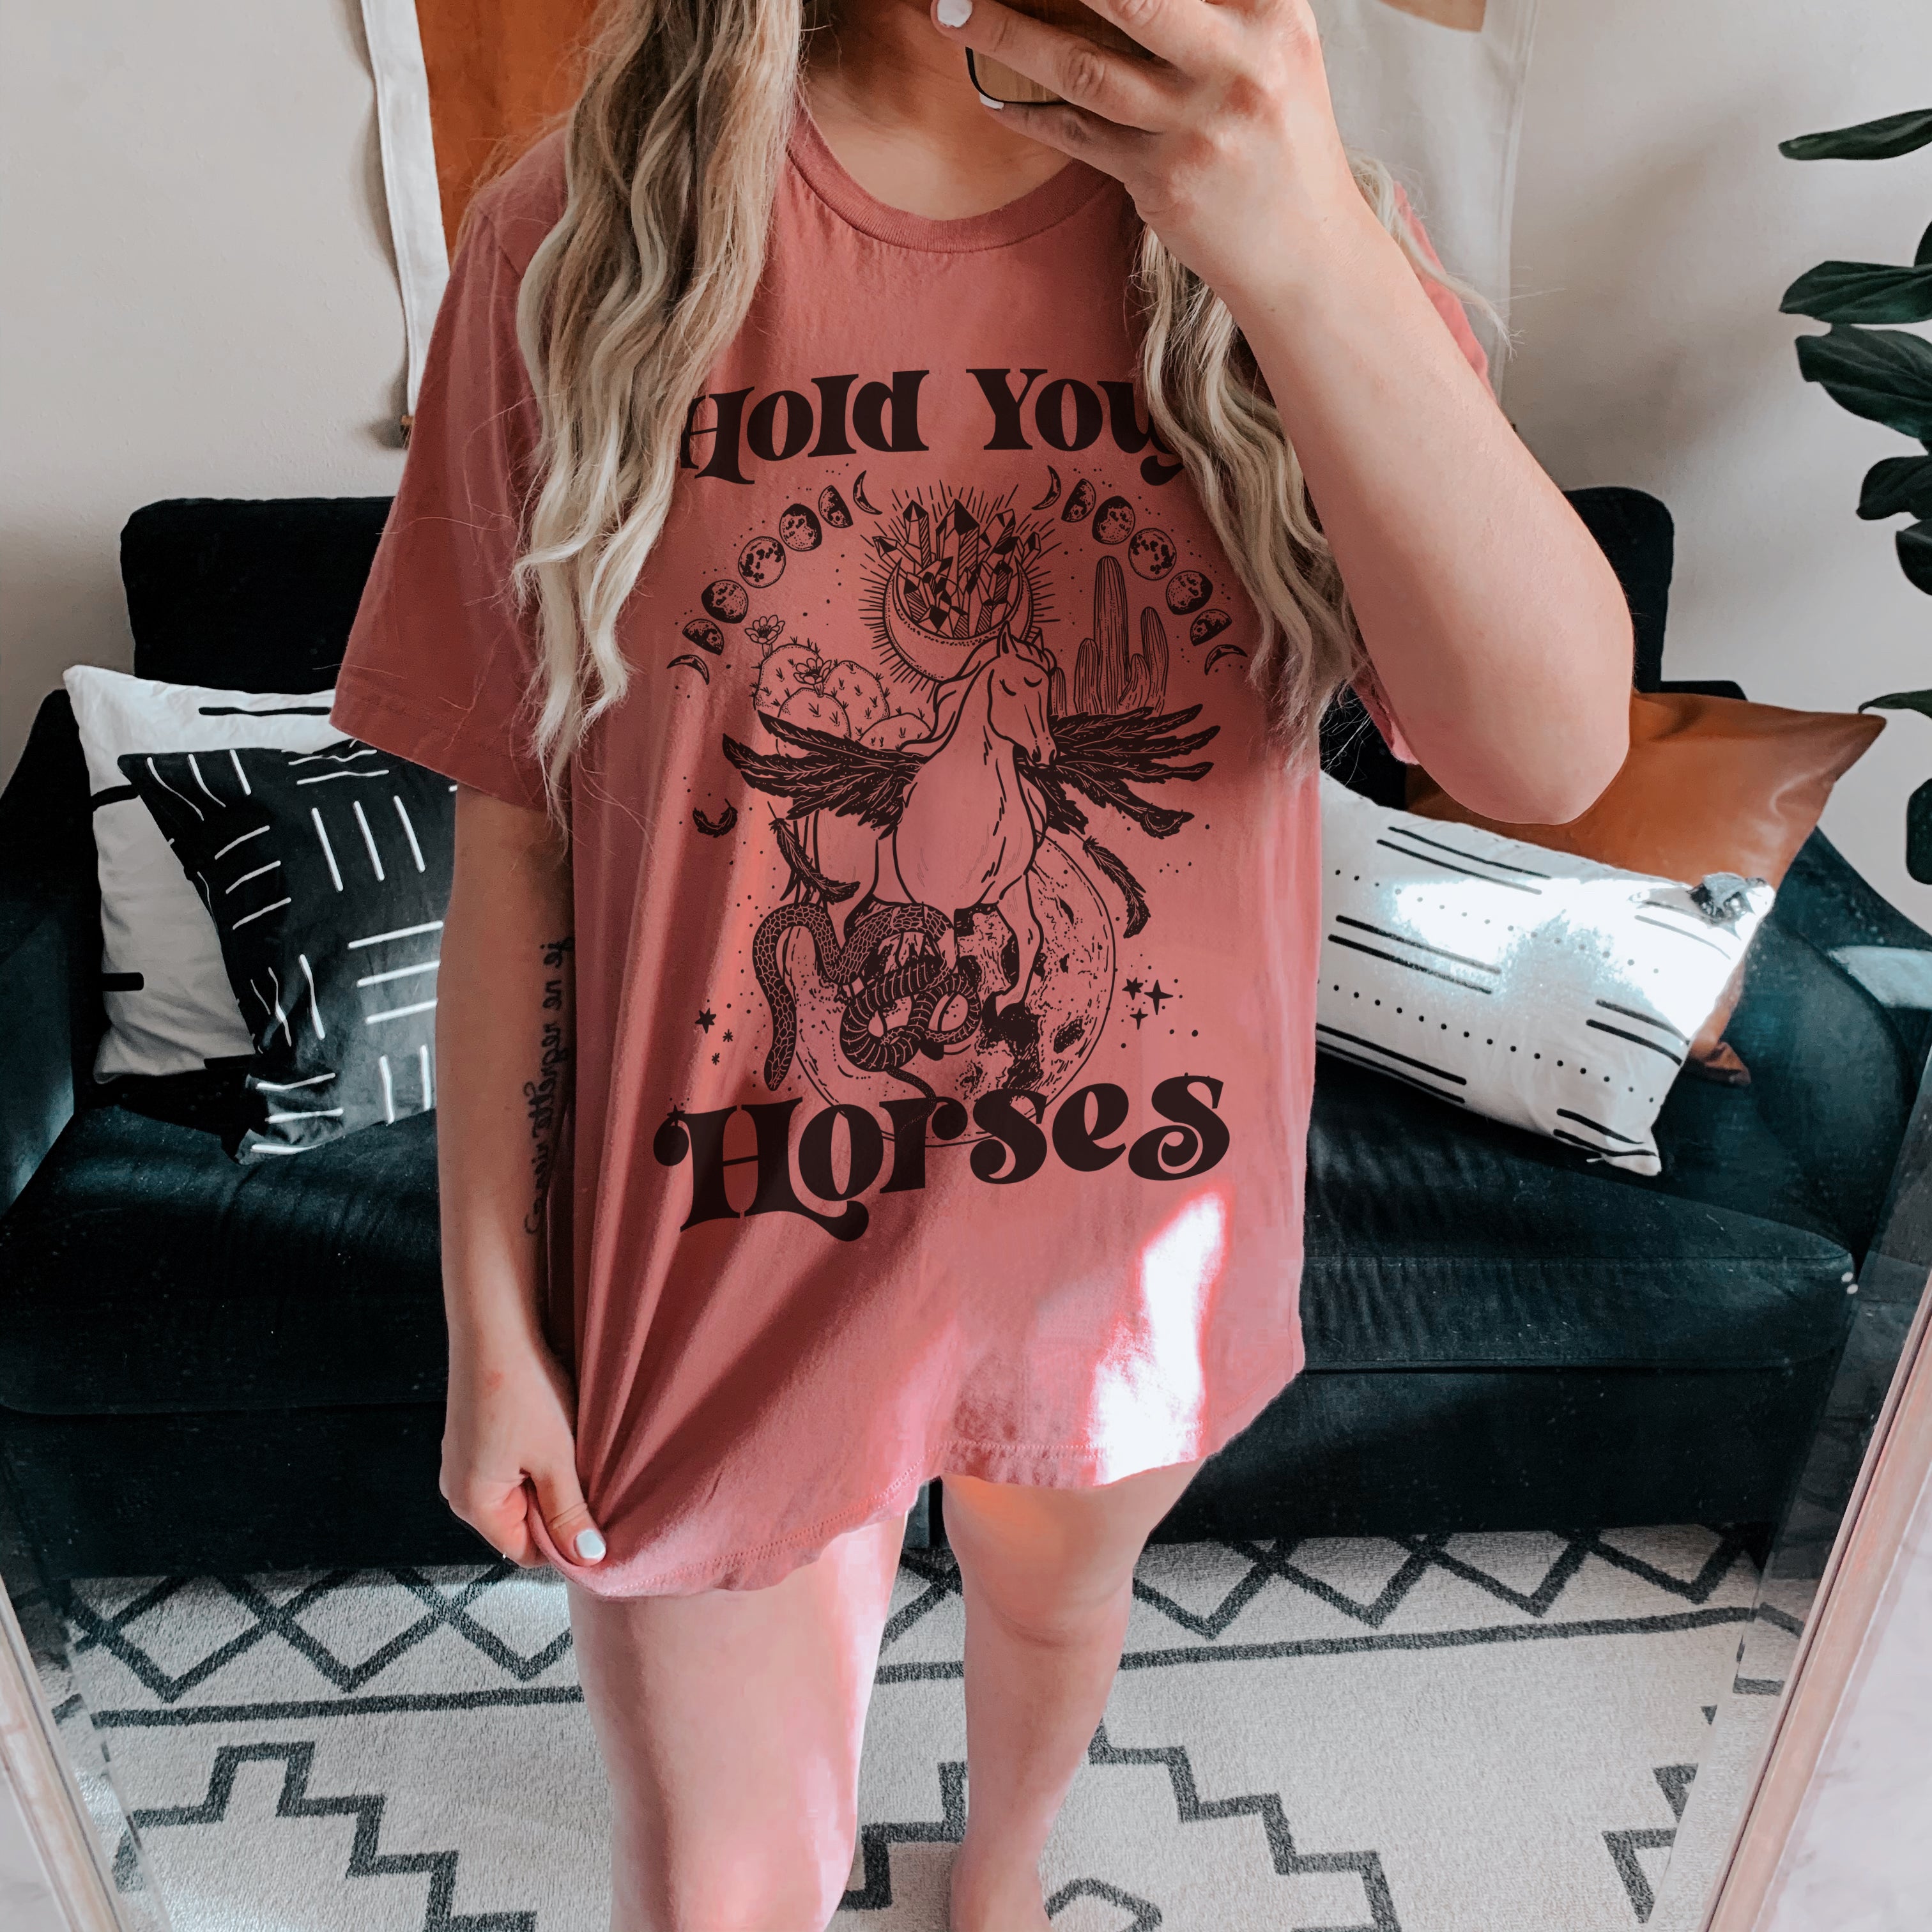 « HOLD YOUR HORSES » UNISEX TEE